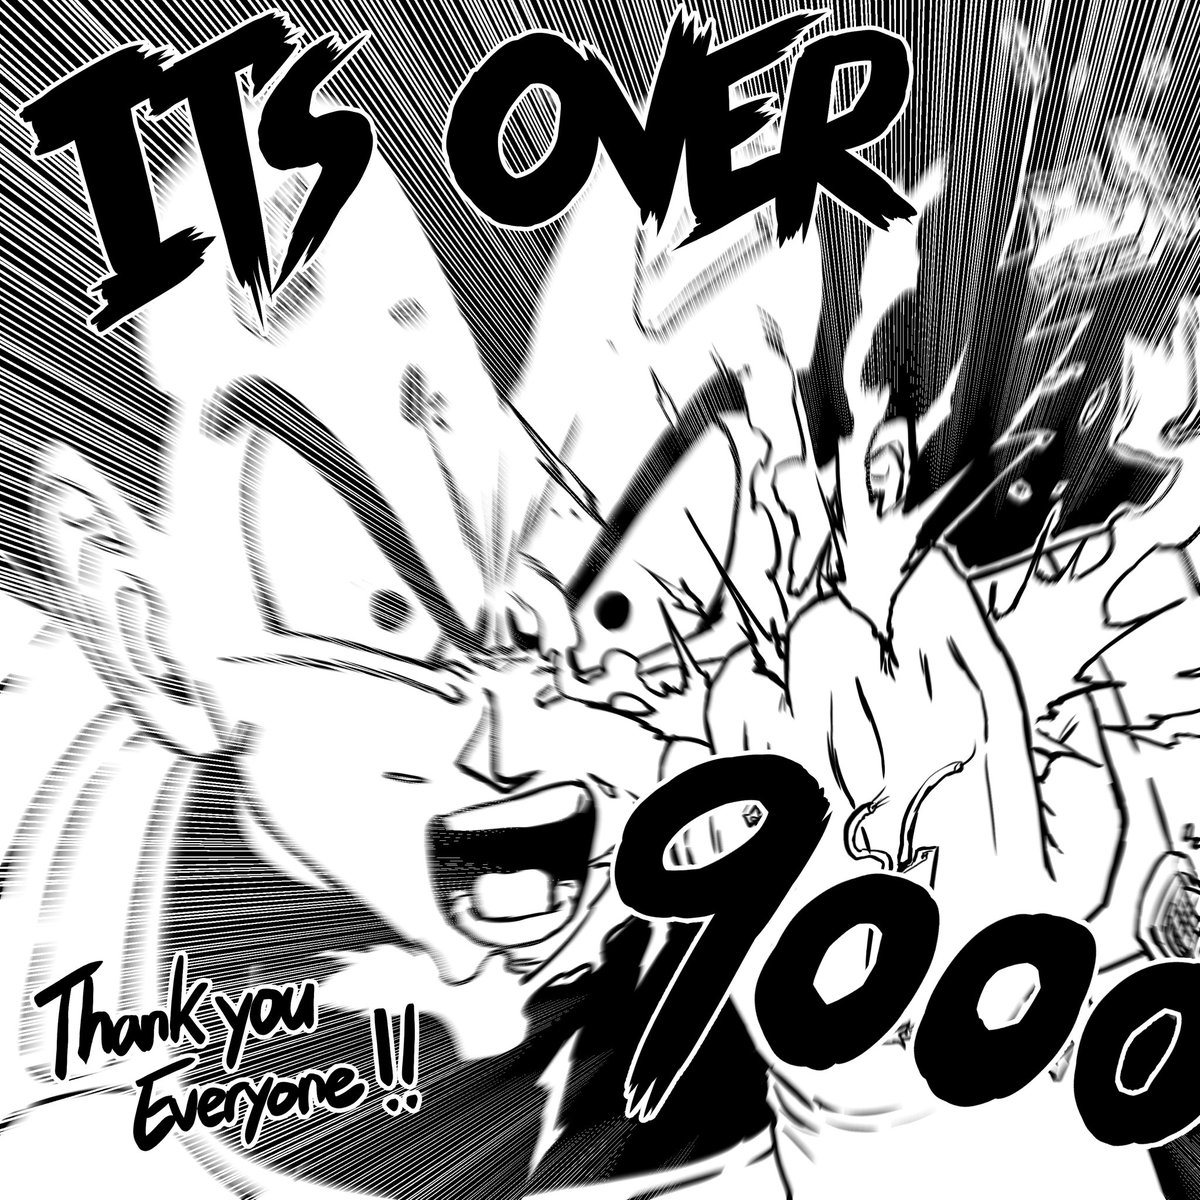 My follower is over 9000!!!
Thank you every one? 